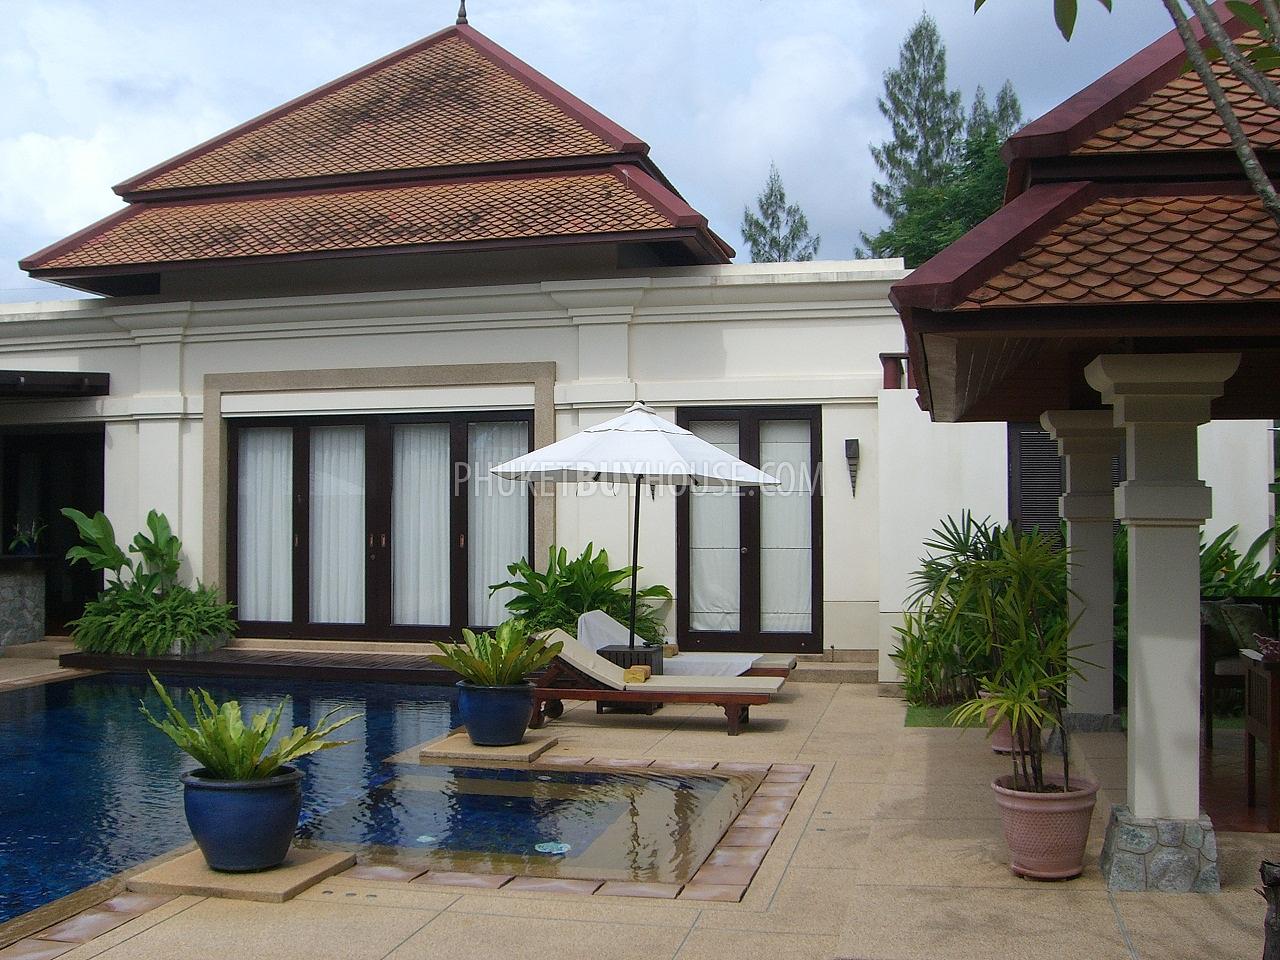 BAN1211: Villa with overlooks the Pool and exquisite Thai garden. Photo #6